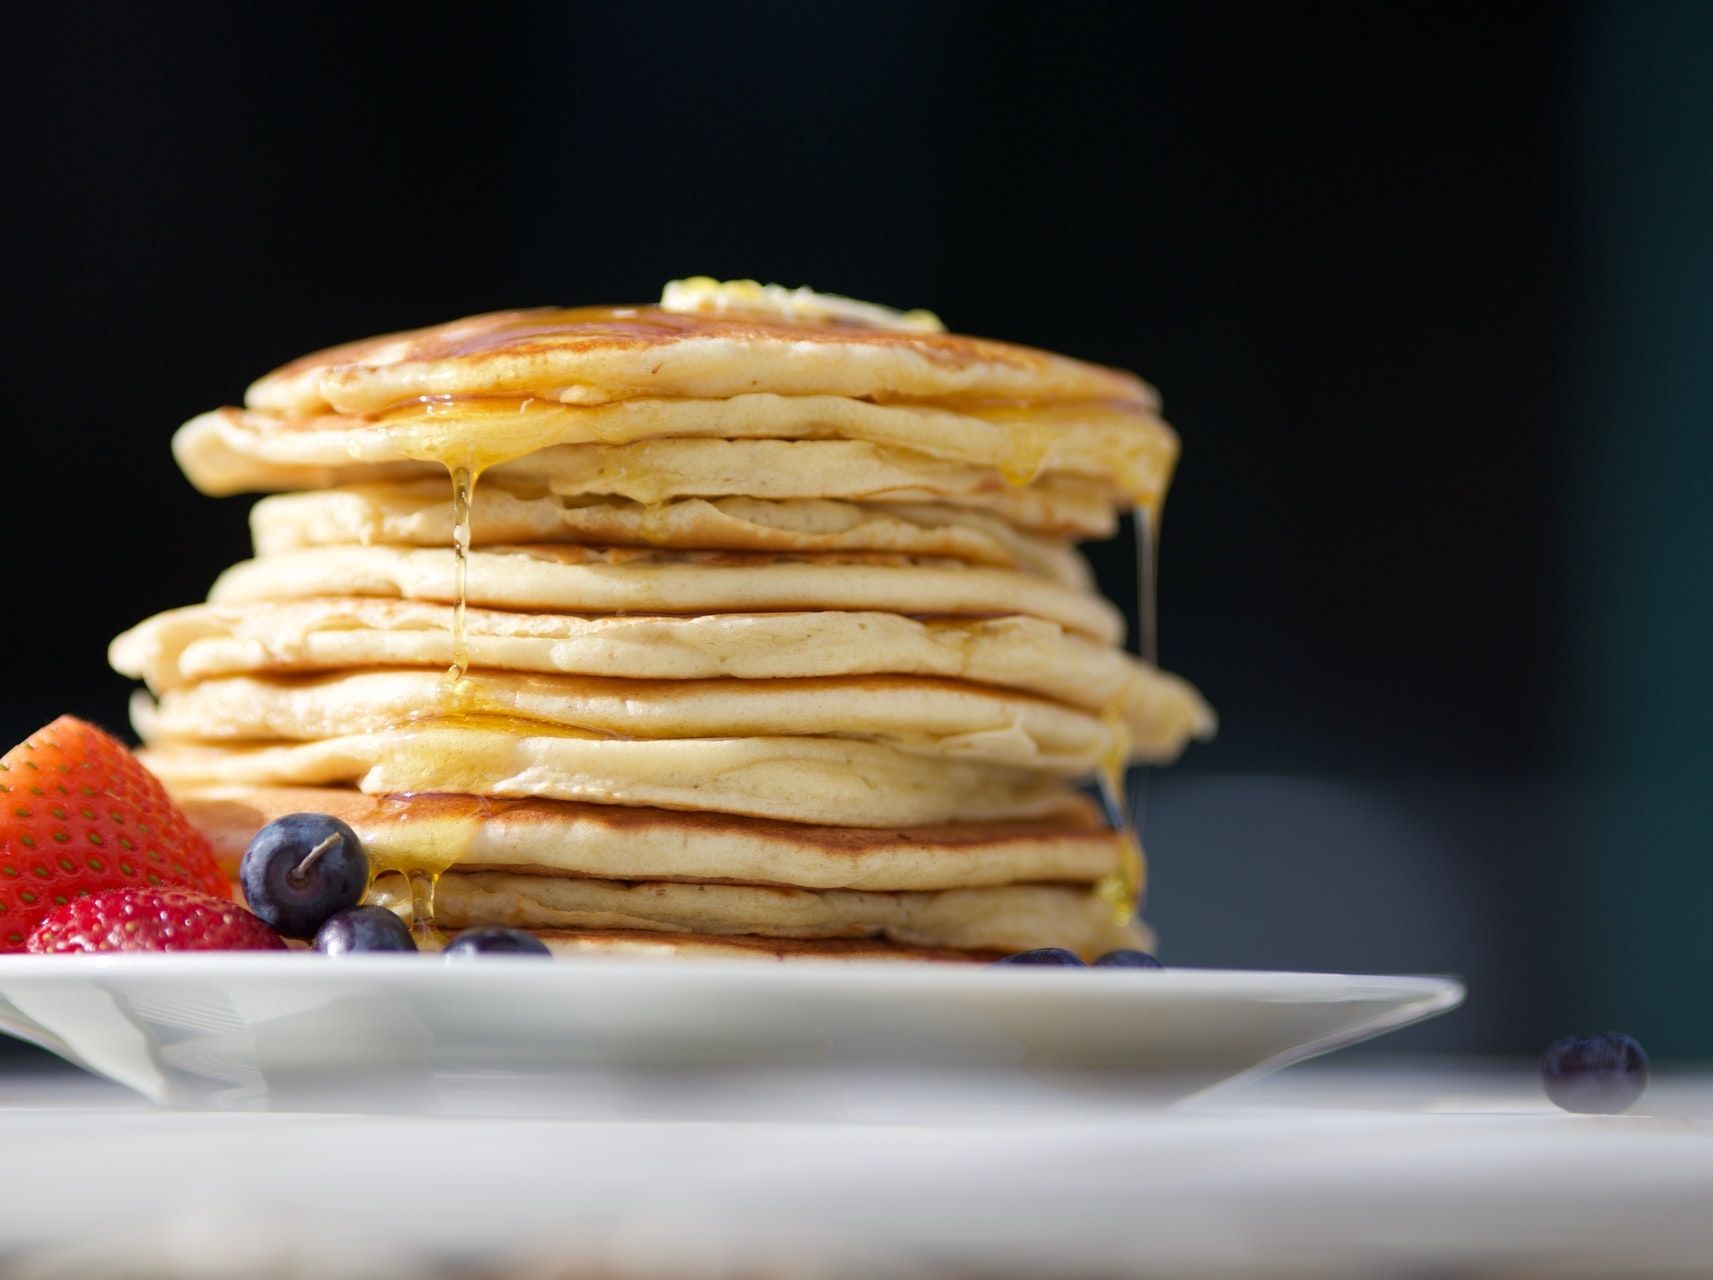 A stack of pancakes taken from a low-angle to show the layers